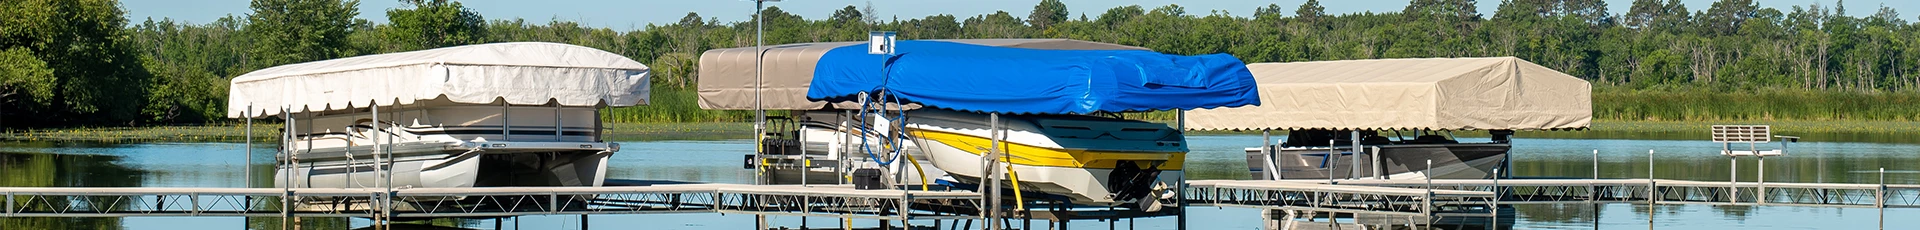 Boat Removal, Dismantle and Disposal in Brainerd Minnesota